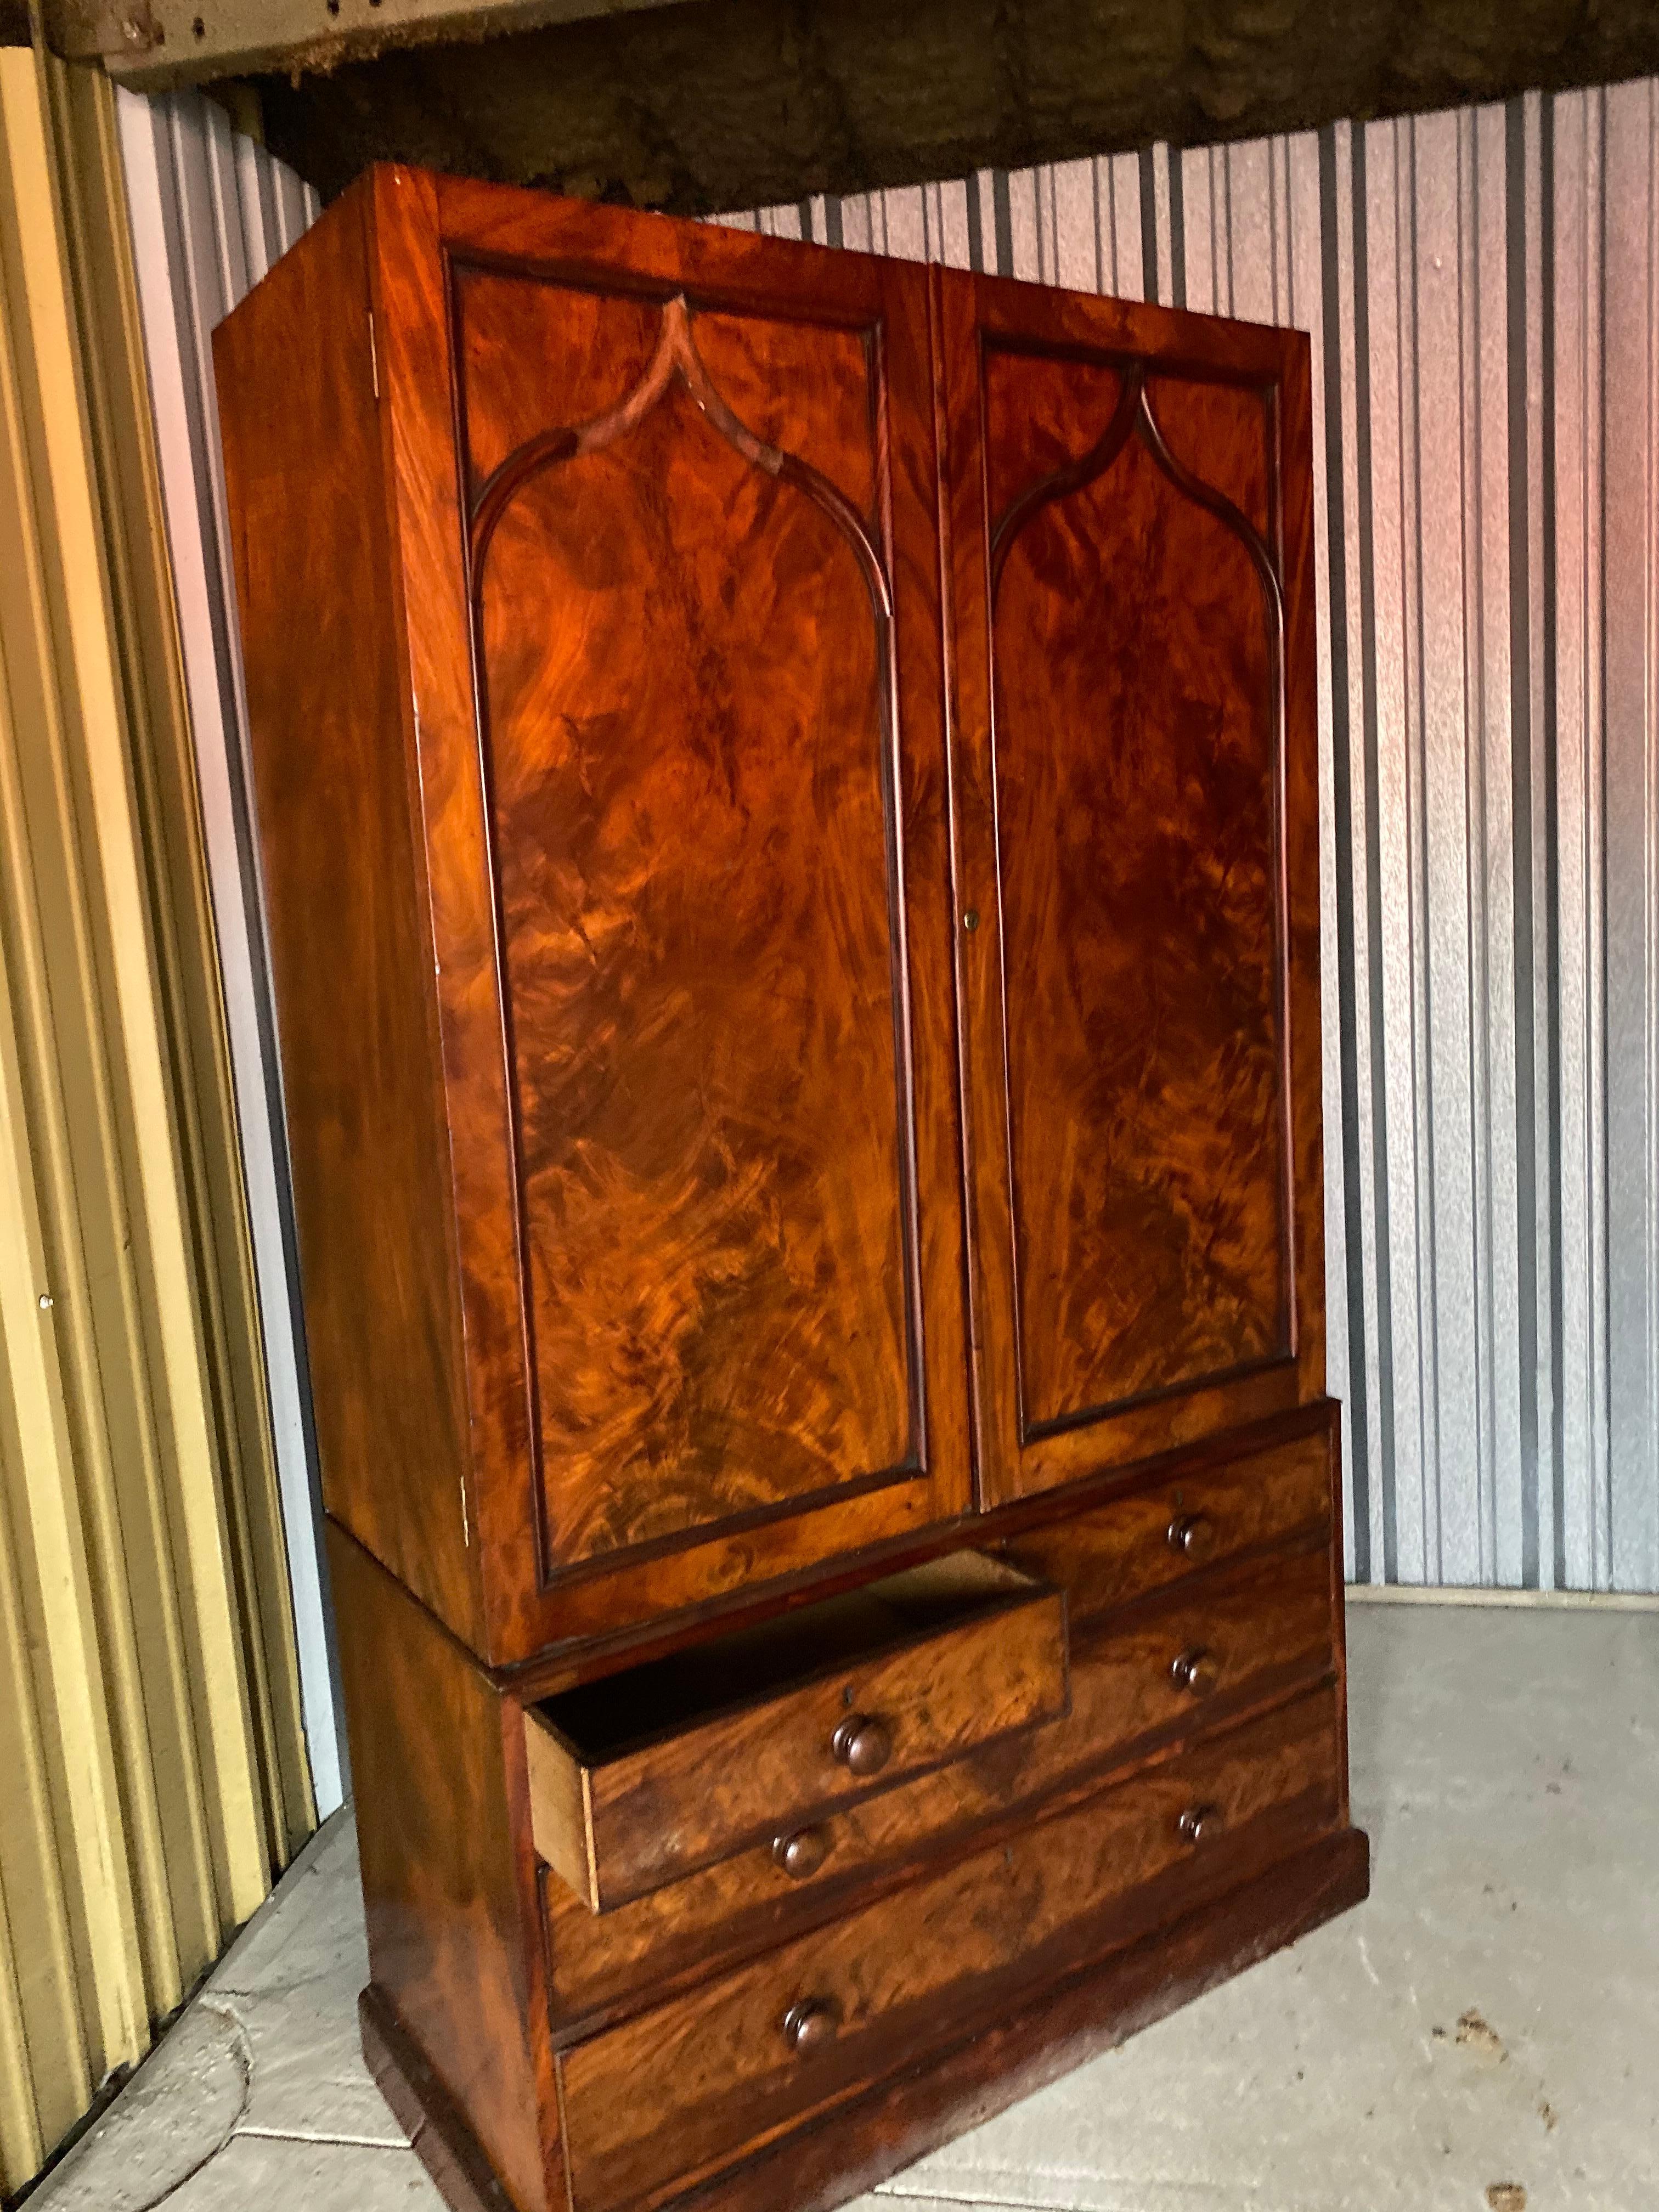 Gorgeous burled wood, This linen press or wardrobe has 4 deep drawers and 2 inside shelves .
Traditionally, a 'linen press' (or just press) is a cabinet, usually of woods such as oak, walnut or mahogany and designed for storing sheets, clothing,